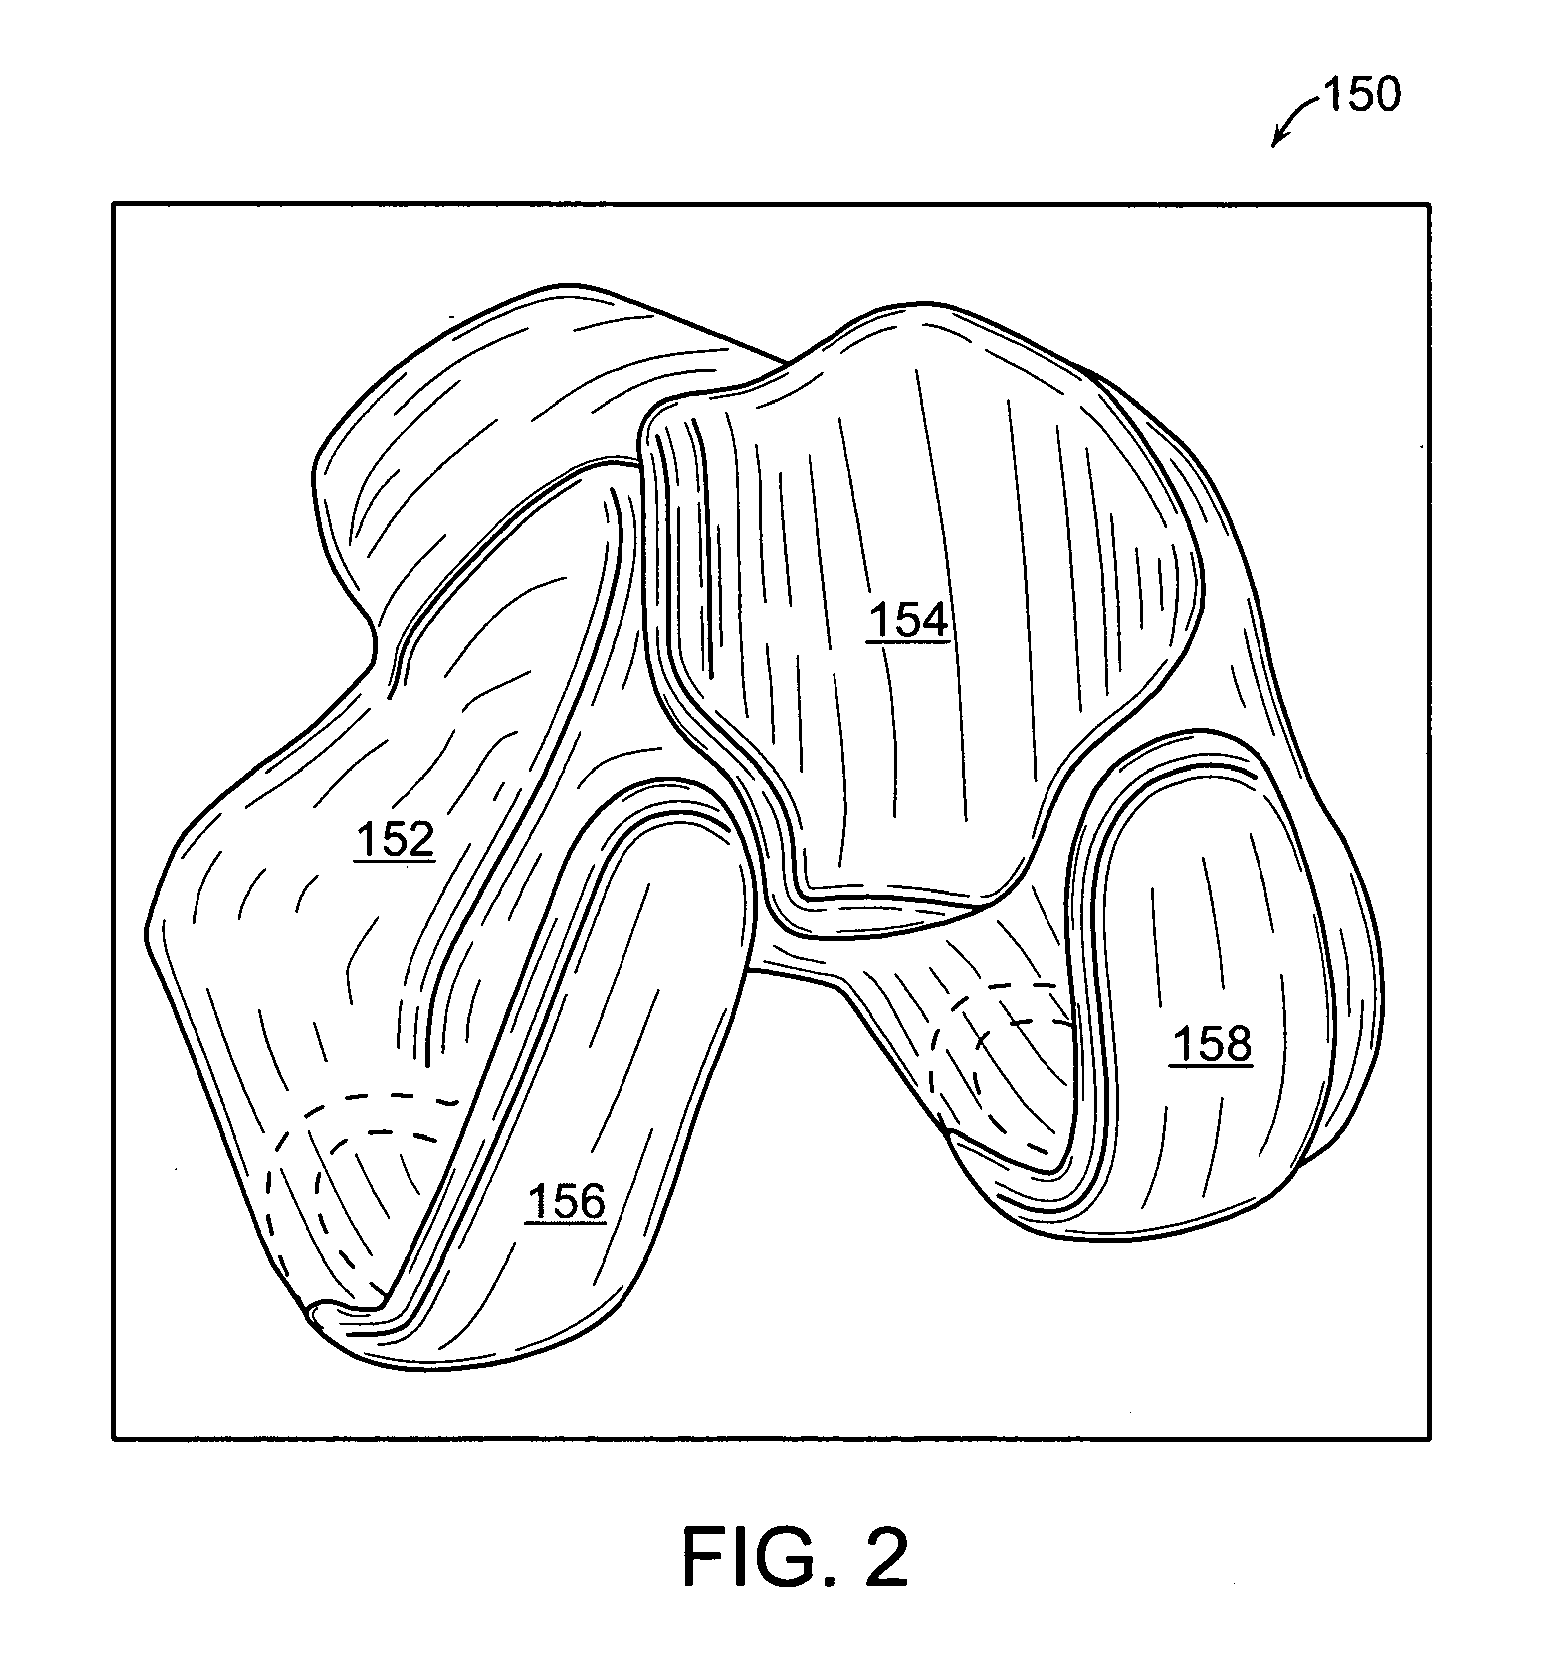 Implant Planning for Multiple Implant Components Using Constraints